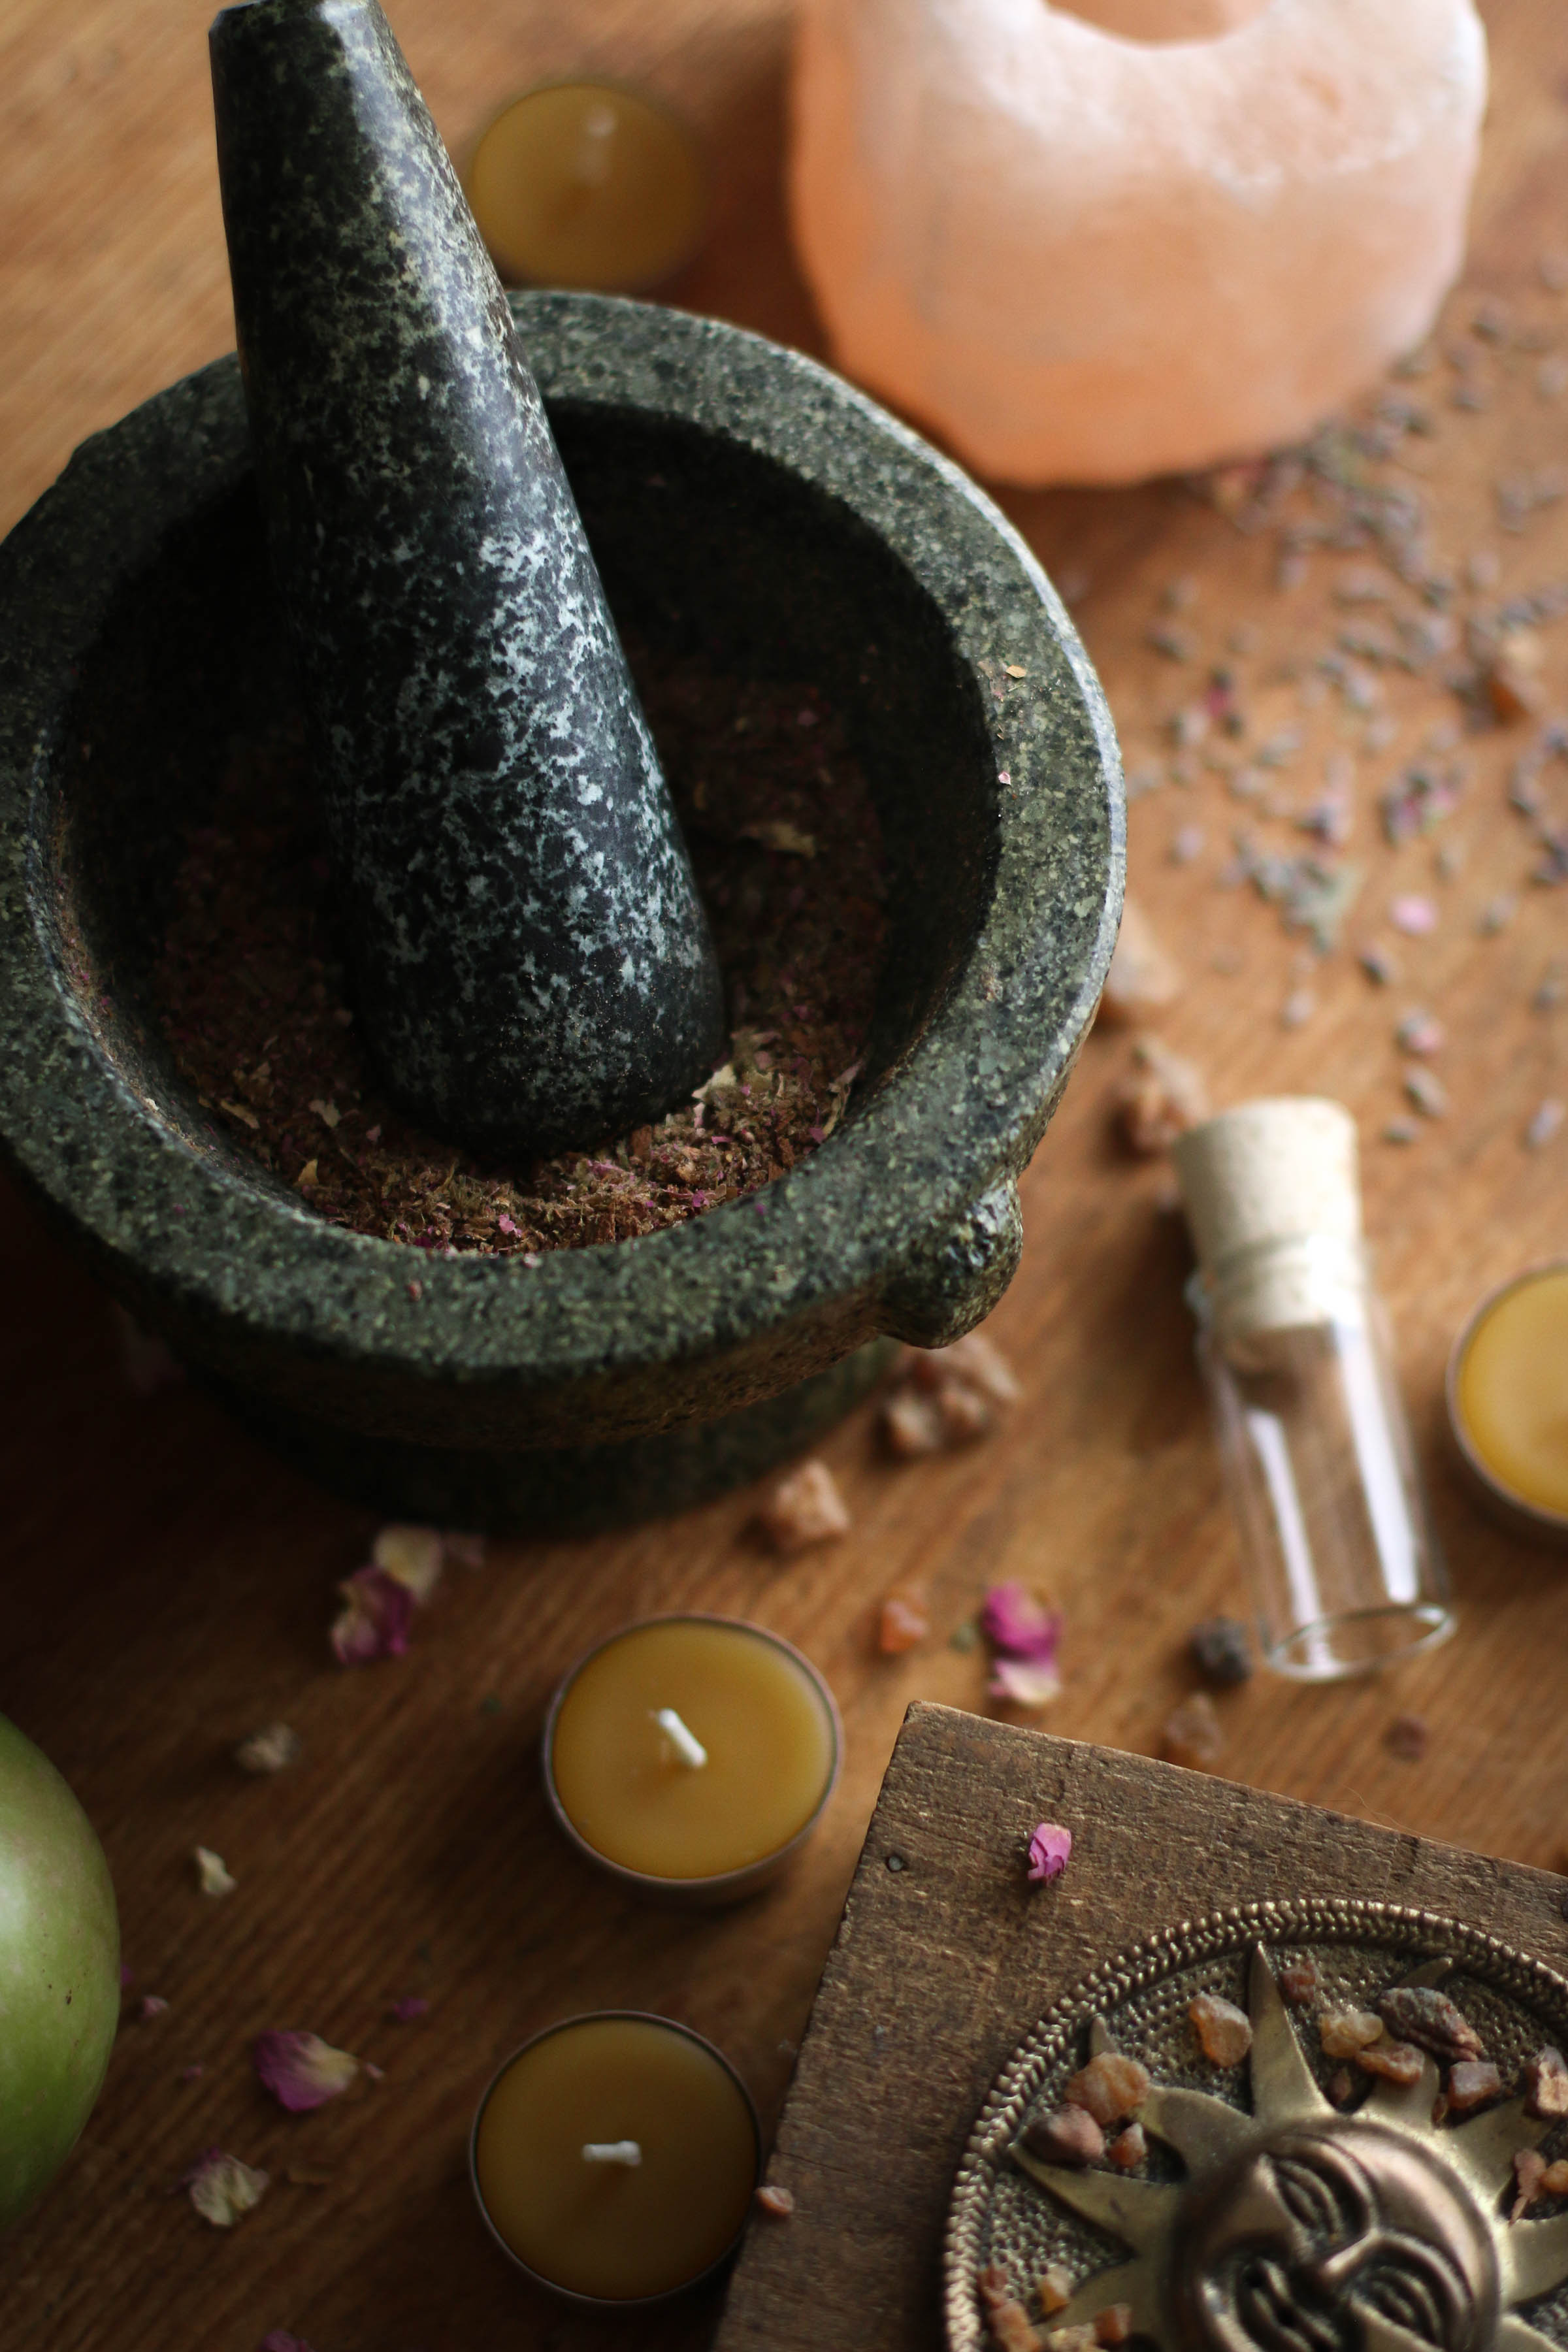 Mortar and pestle on top of a wooden table with a glass vial and beeswax candles nearby